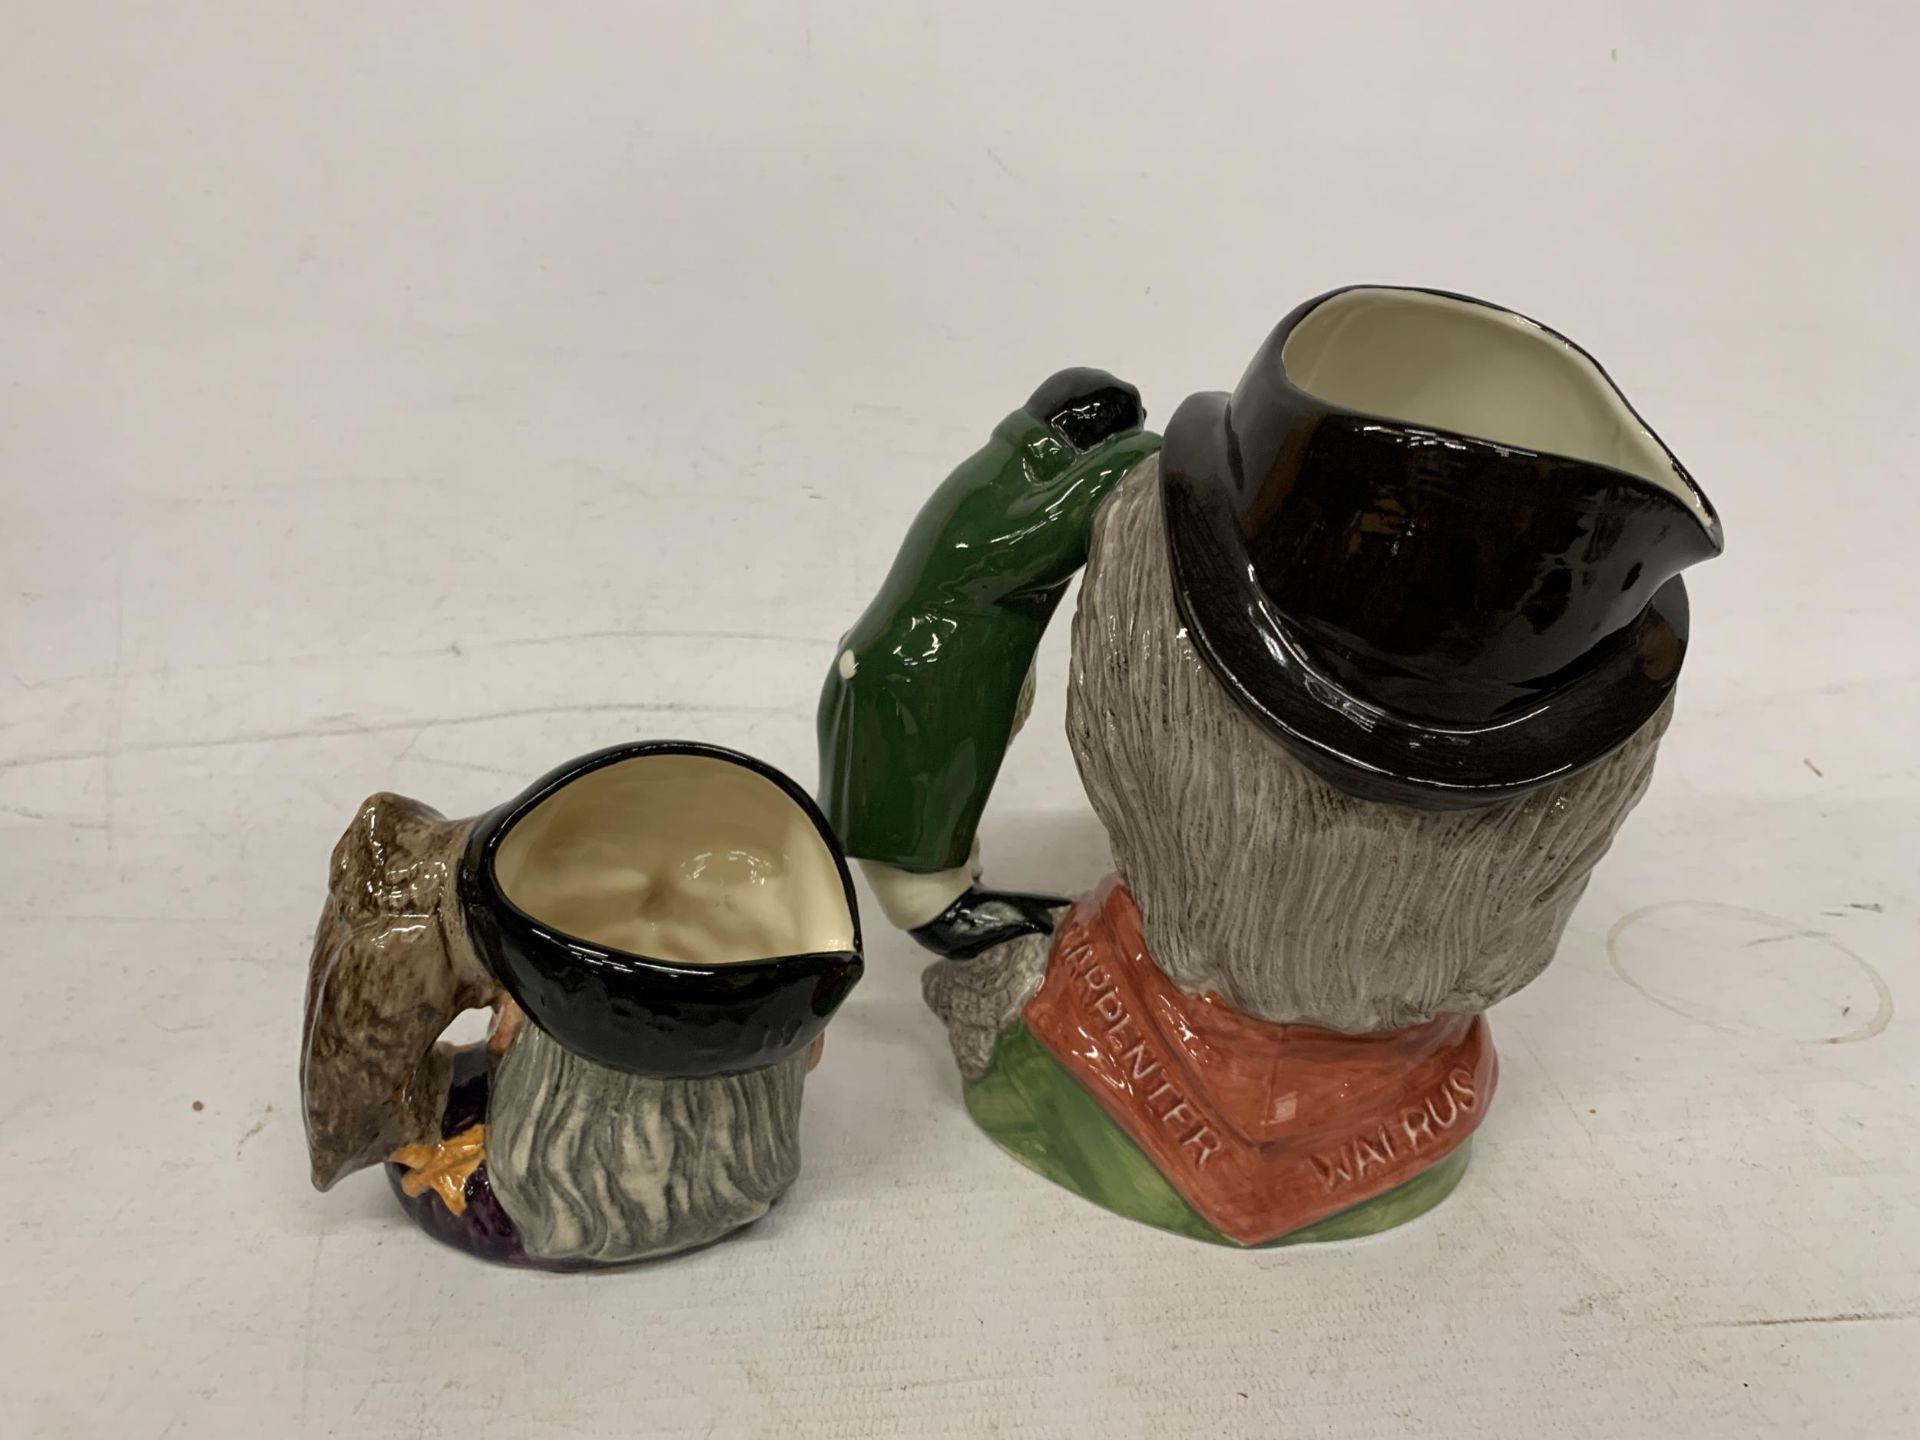 TWO ROYAL DOULTON TOBY JUGS - MERLIN AND THE WALRUS AND CARPENTER - Image 2 of 3